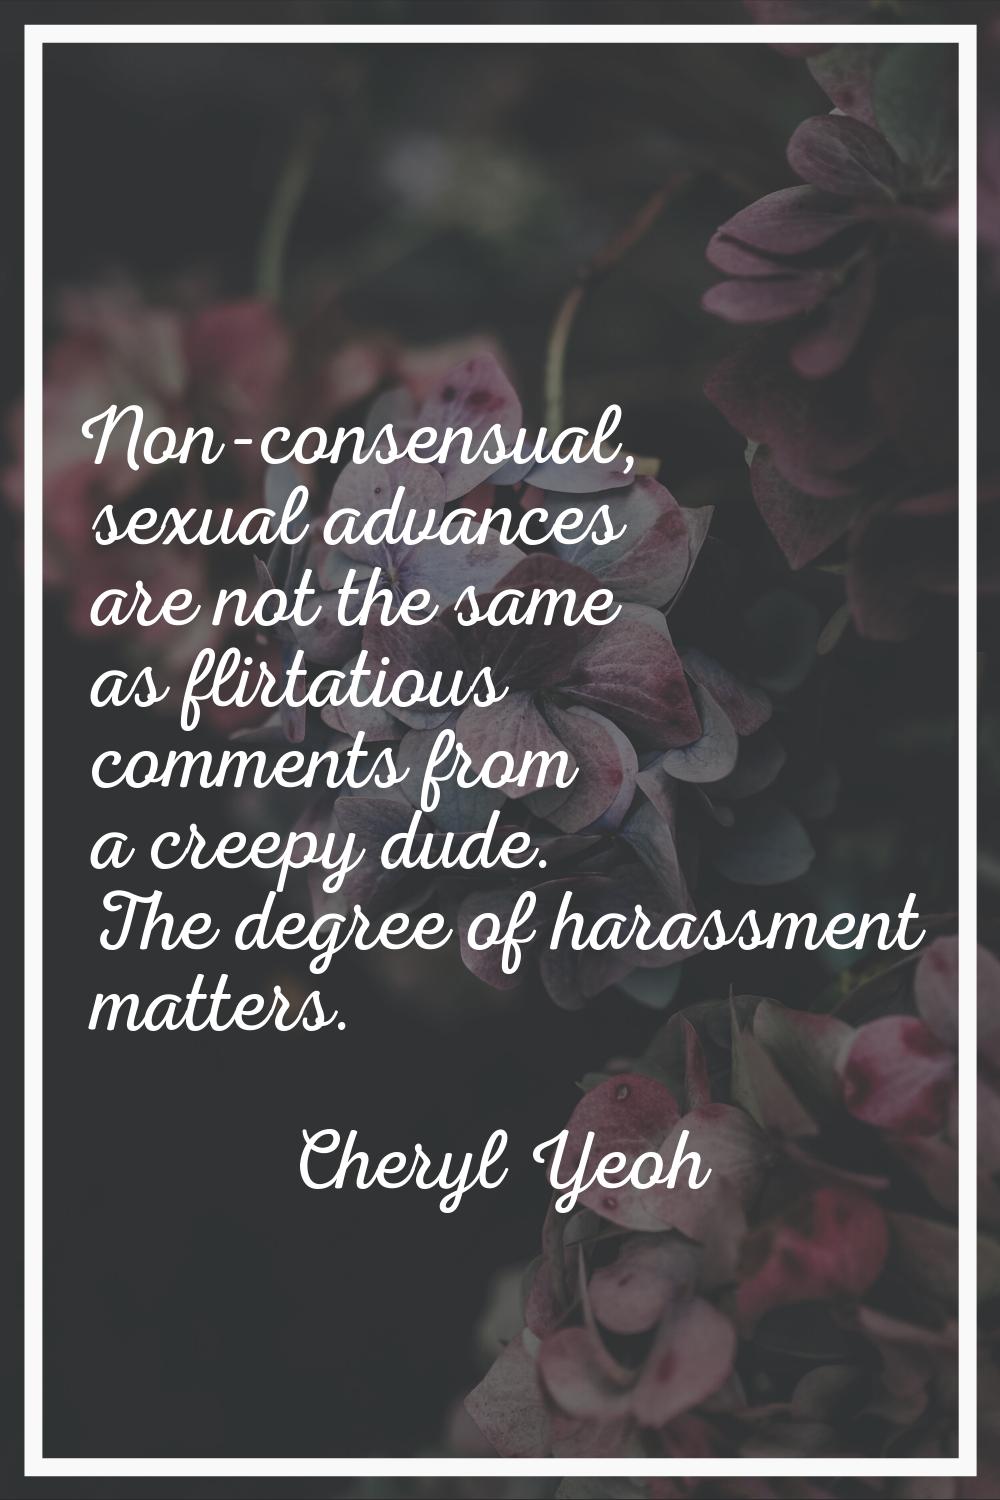 Non-consensual, sexual advances are not the same as flirtatious comments from a creepy dude. The de